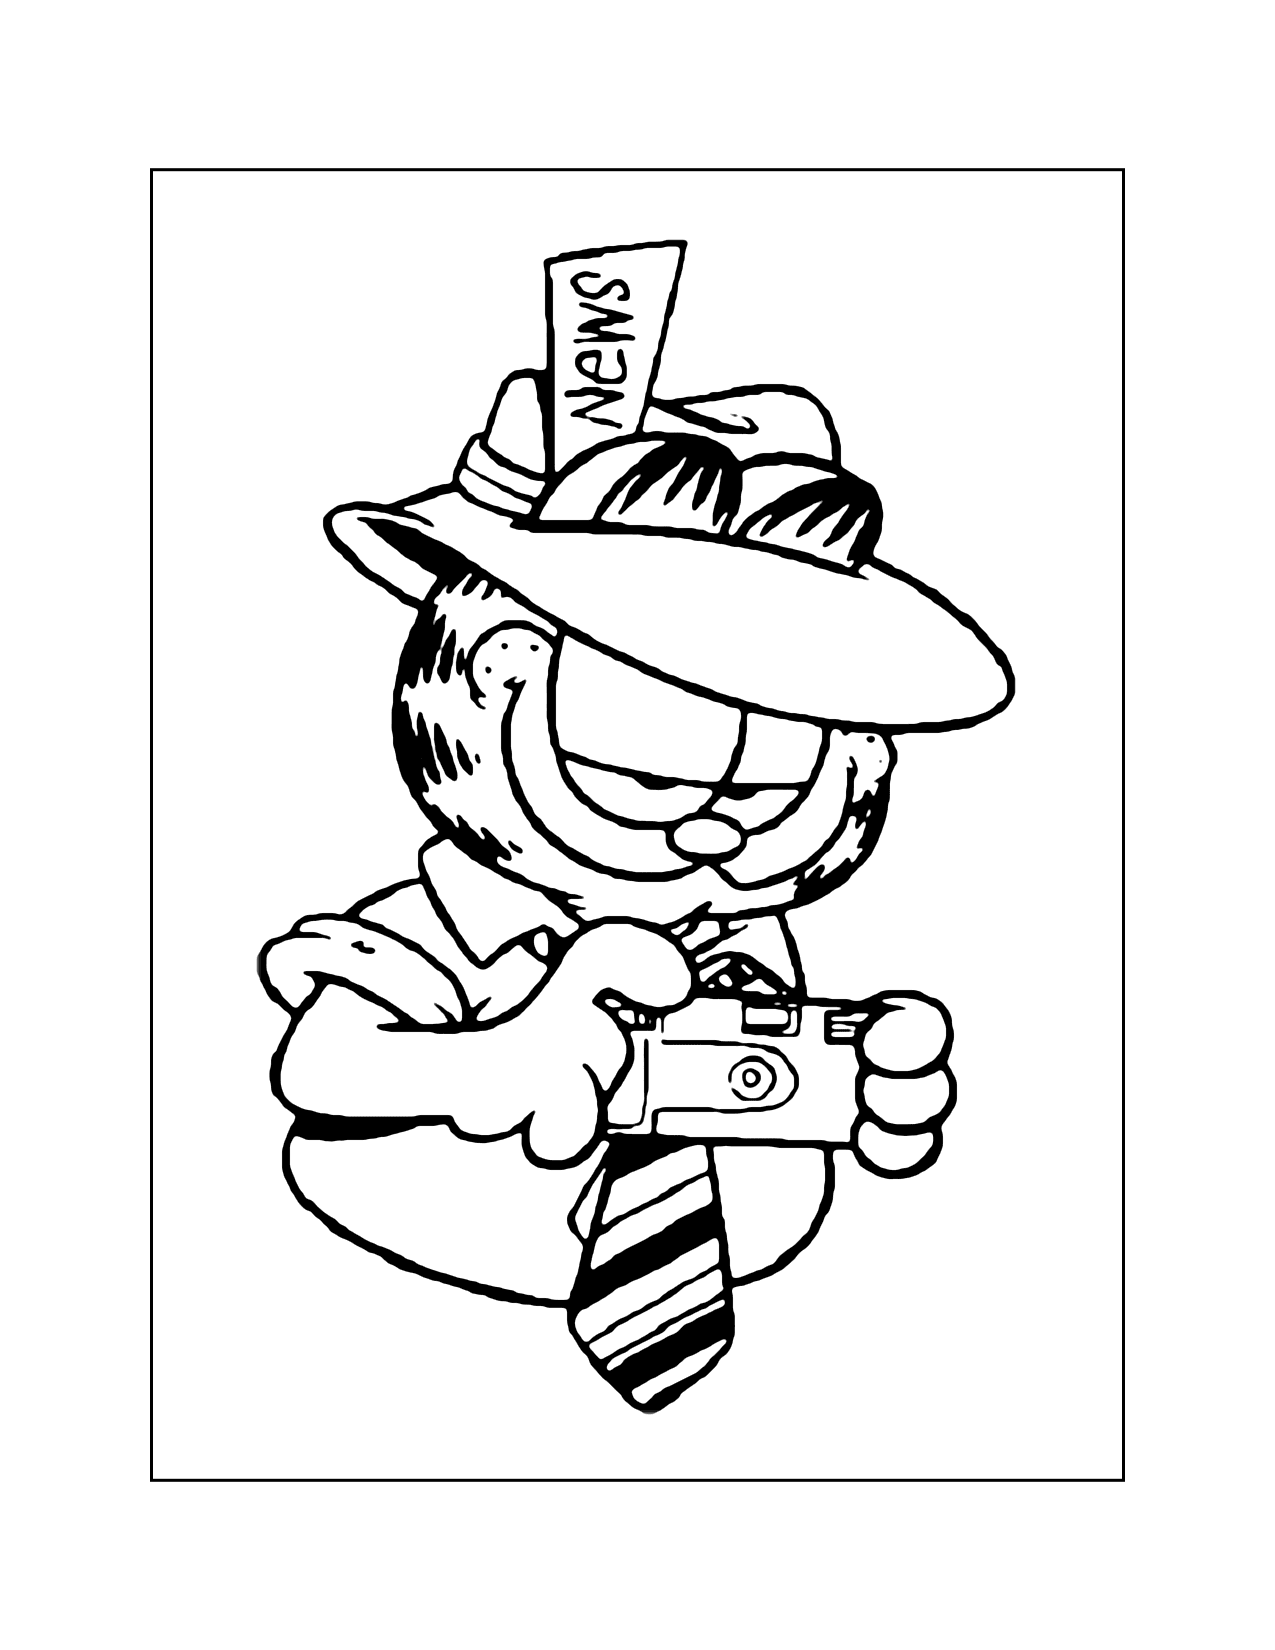 News Reporter Garfield Coloring Page